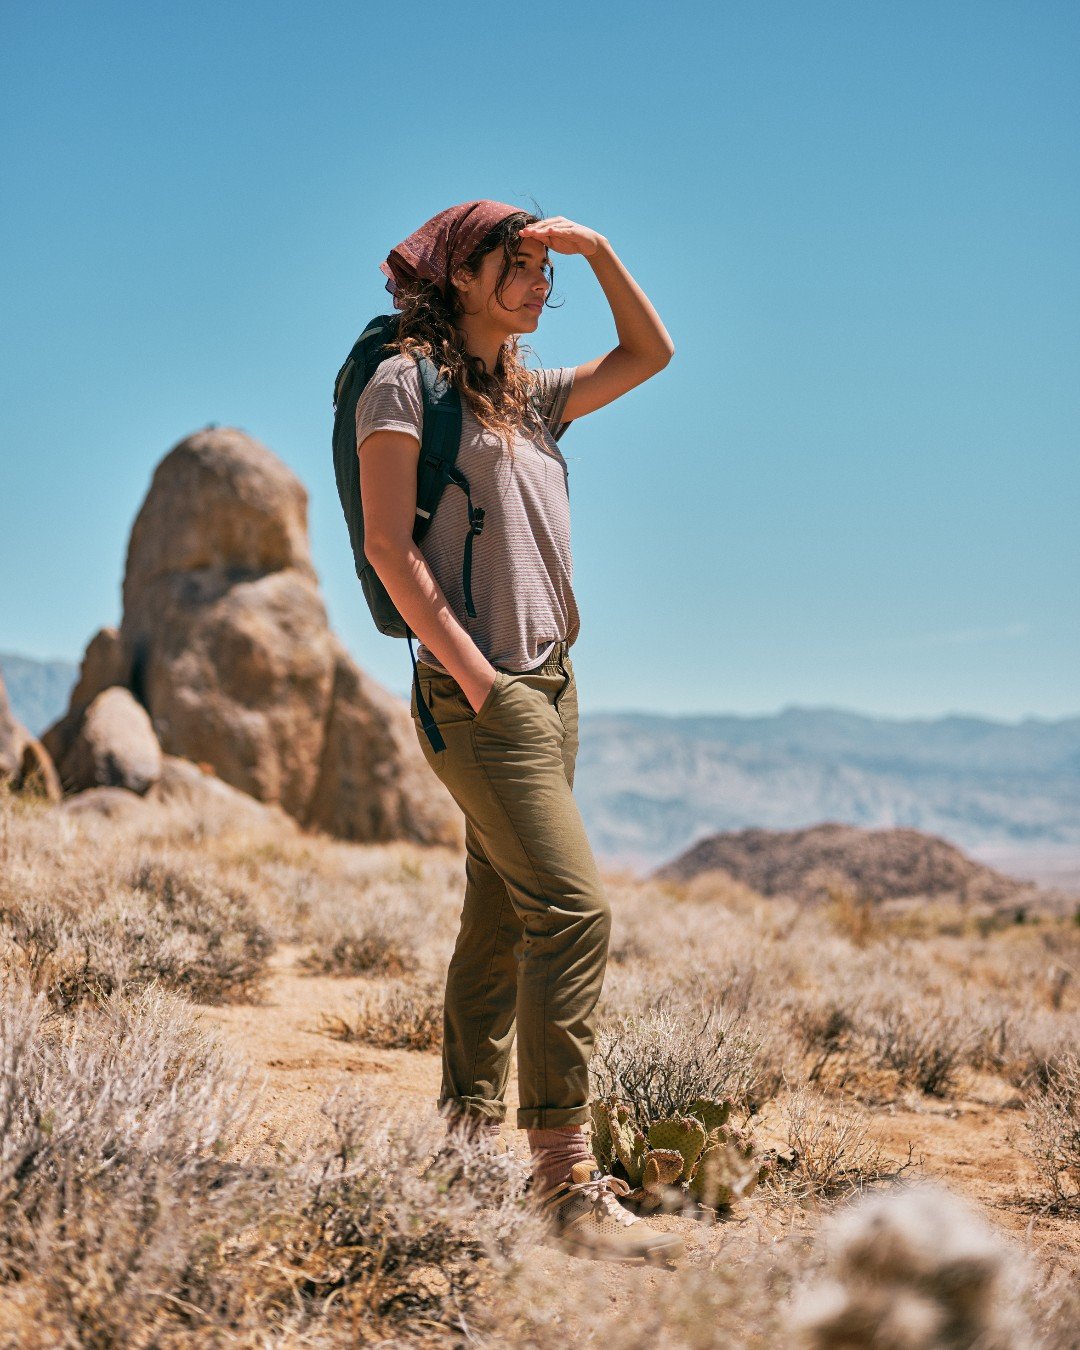 Womens Hiking Gear 5 images - Happiest Outdoors